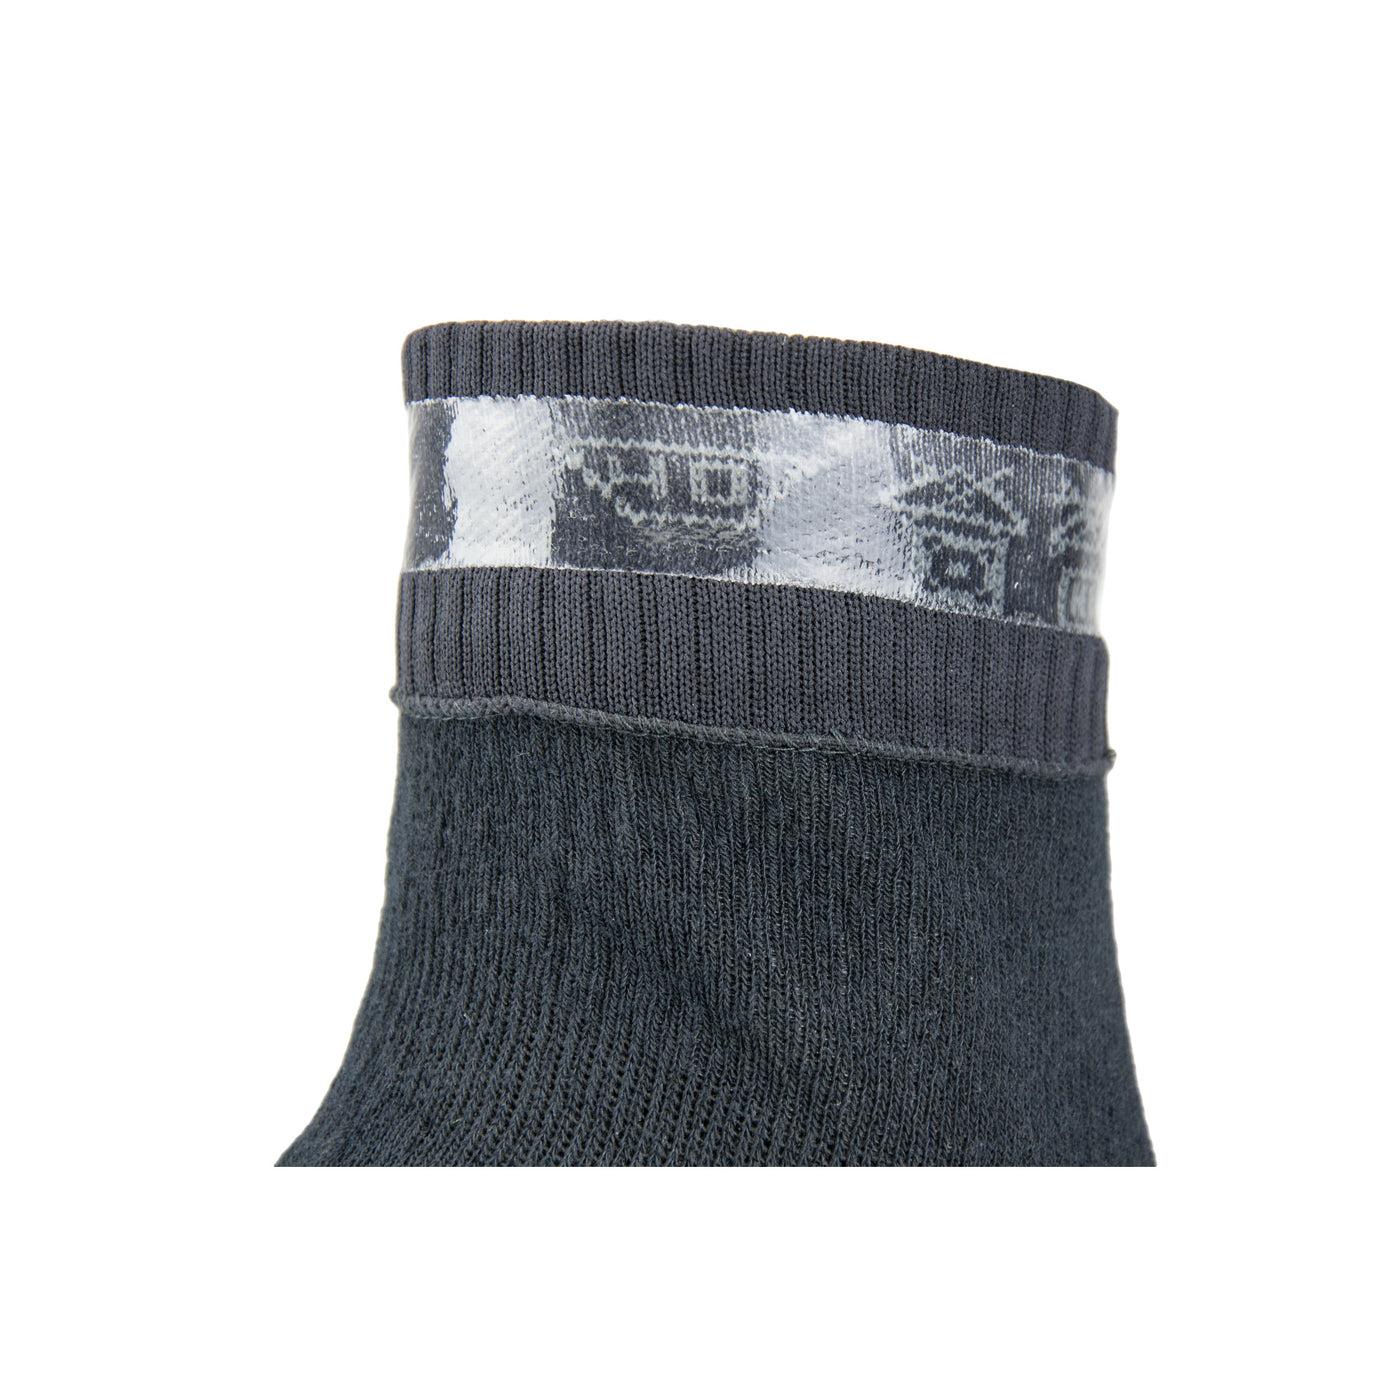 Waterproof Warm Weather Ankle Length Sock with Hydrostop